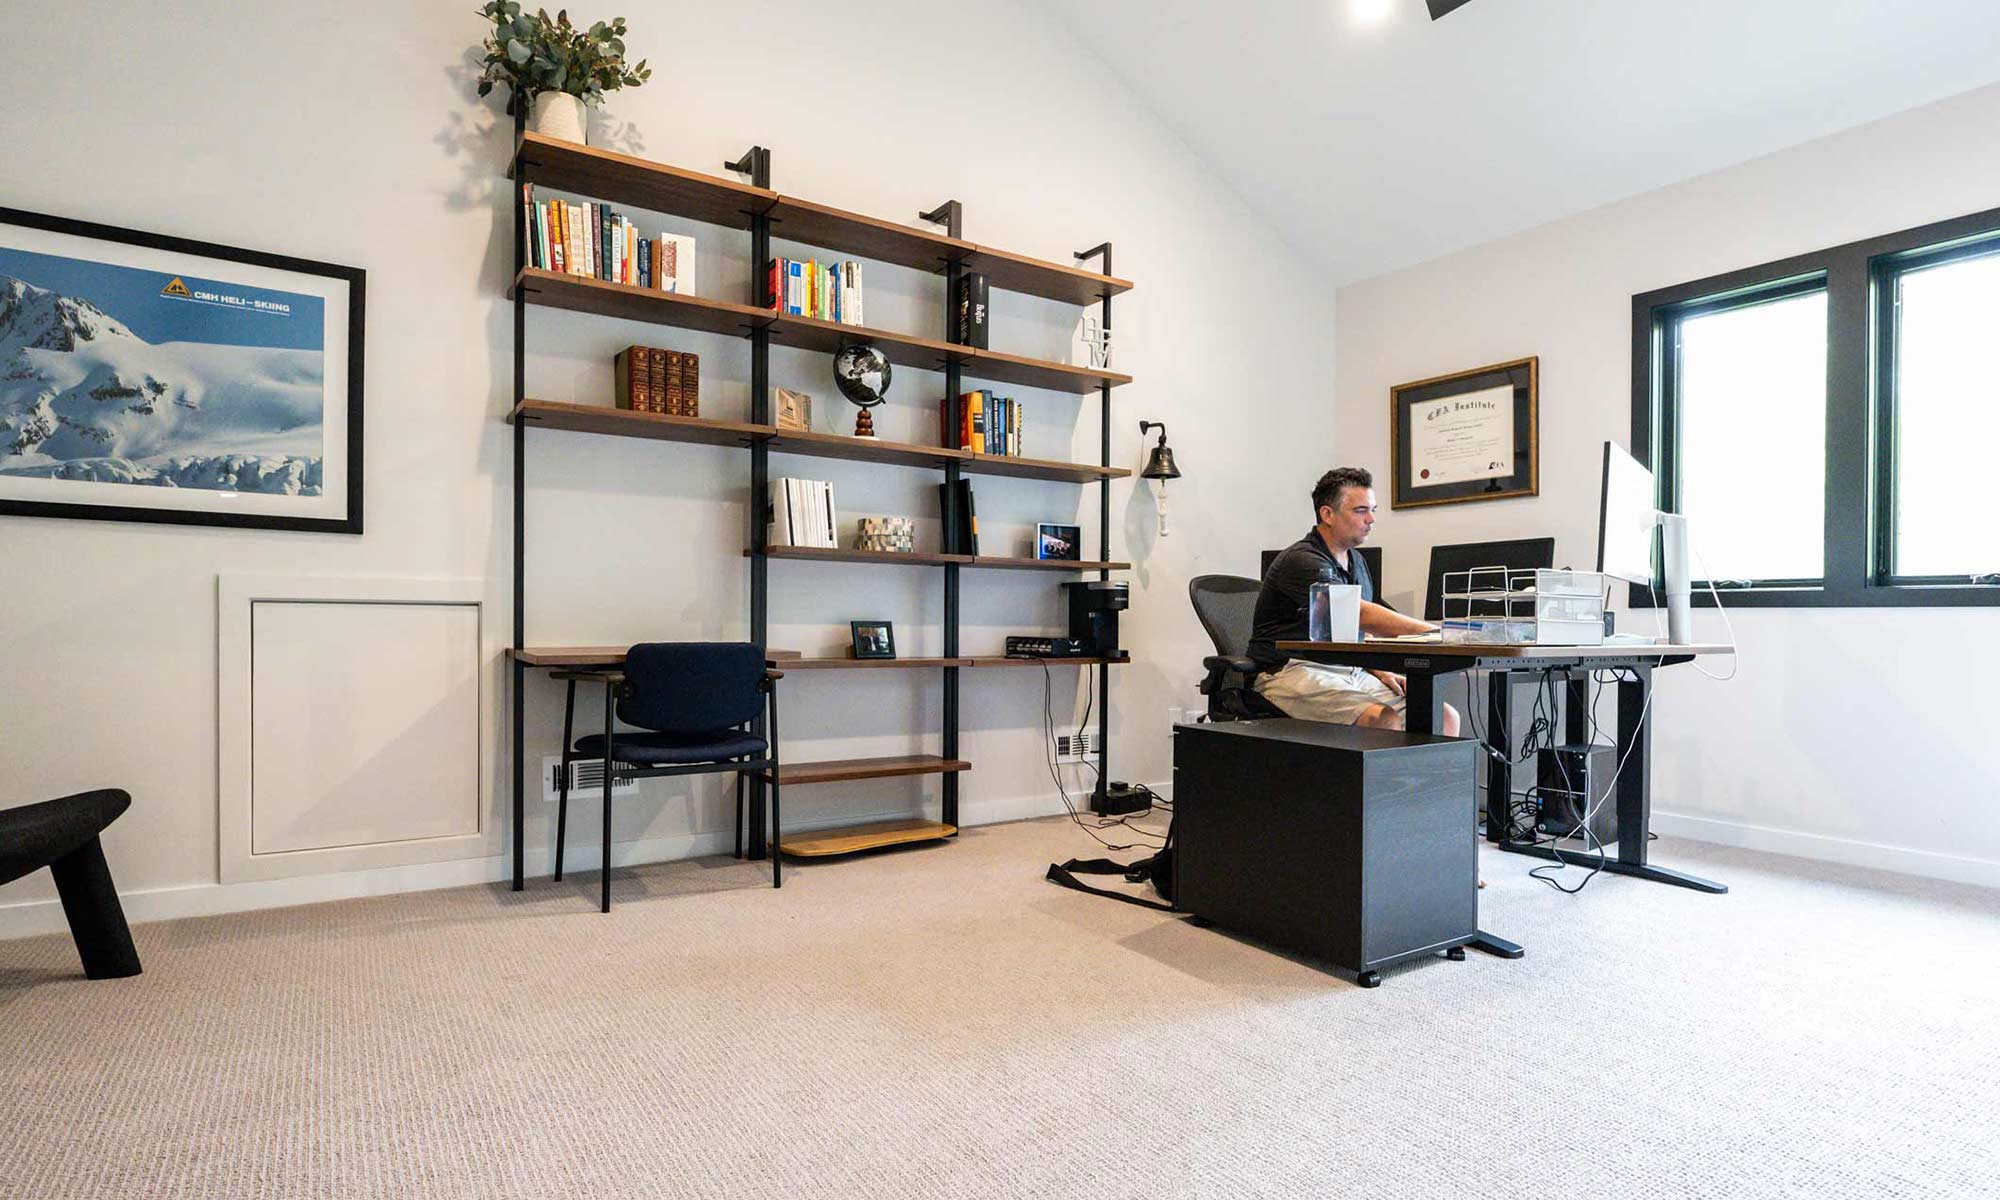 interior view of modern shelves and desk in home office addition with man working